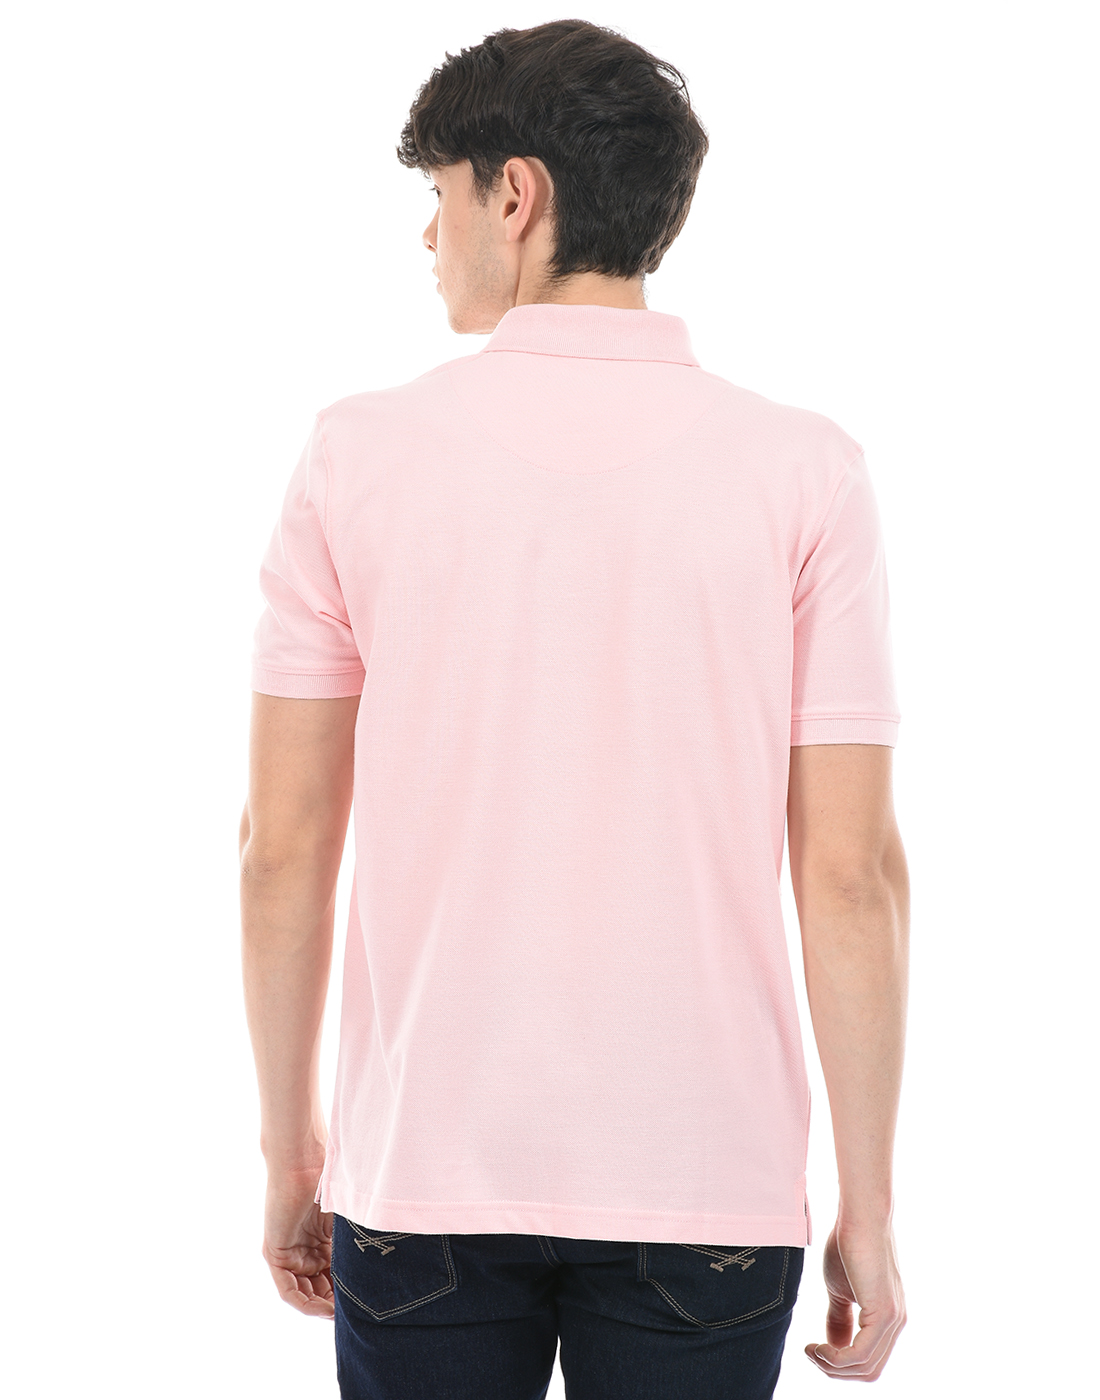 ONEWAY Half Sleeve Solid Polo Neck T-Shirt for Men|100% Cotton|Regular Fit|Casual Wear|Collared Men's T-Shirt